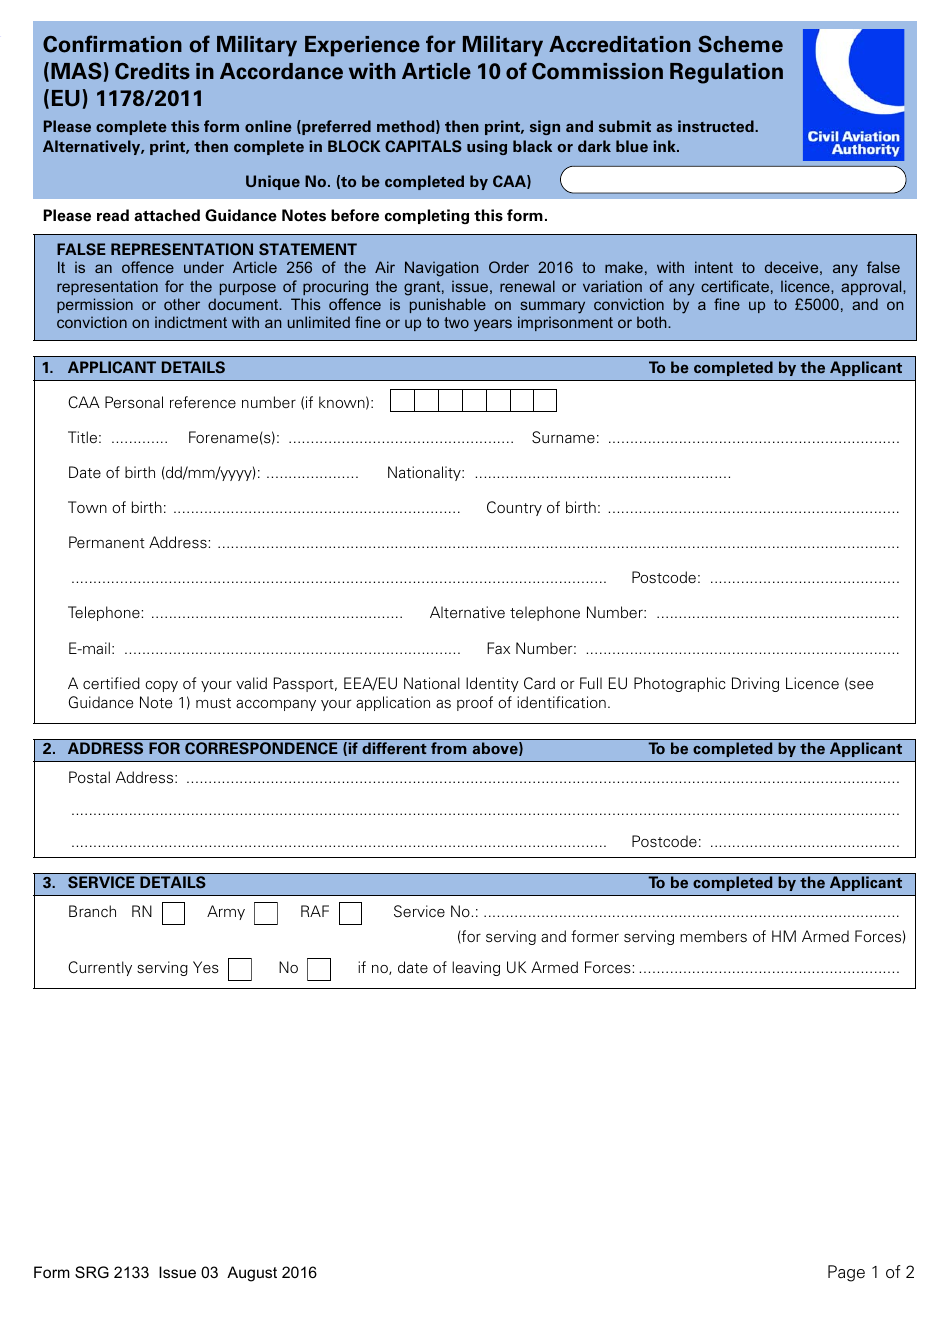 Form SRG2133 Confirmation of Military Experience for Military Accreditation Scheme (Mas) Credits in Accordance With Article 10 of Commission Regulation (Eu) 1178 / 2011 - United Kingdom, Page 1